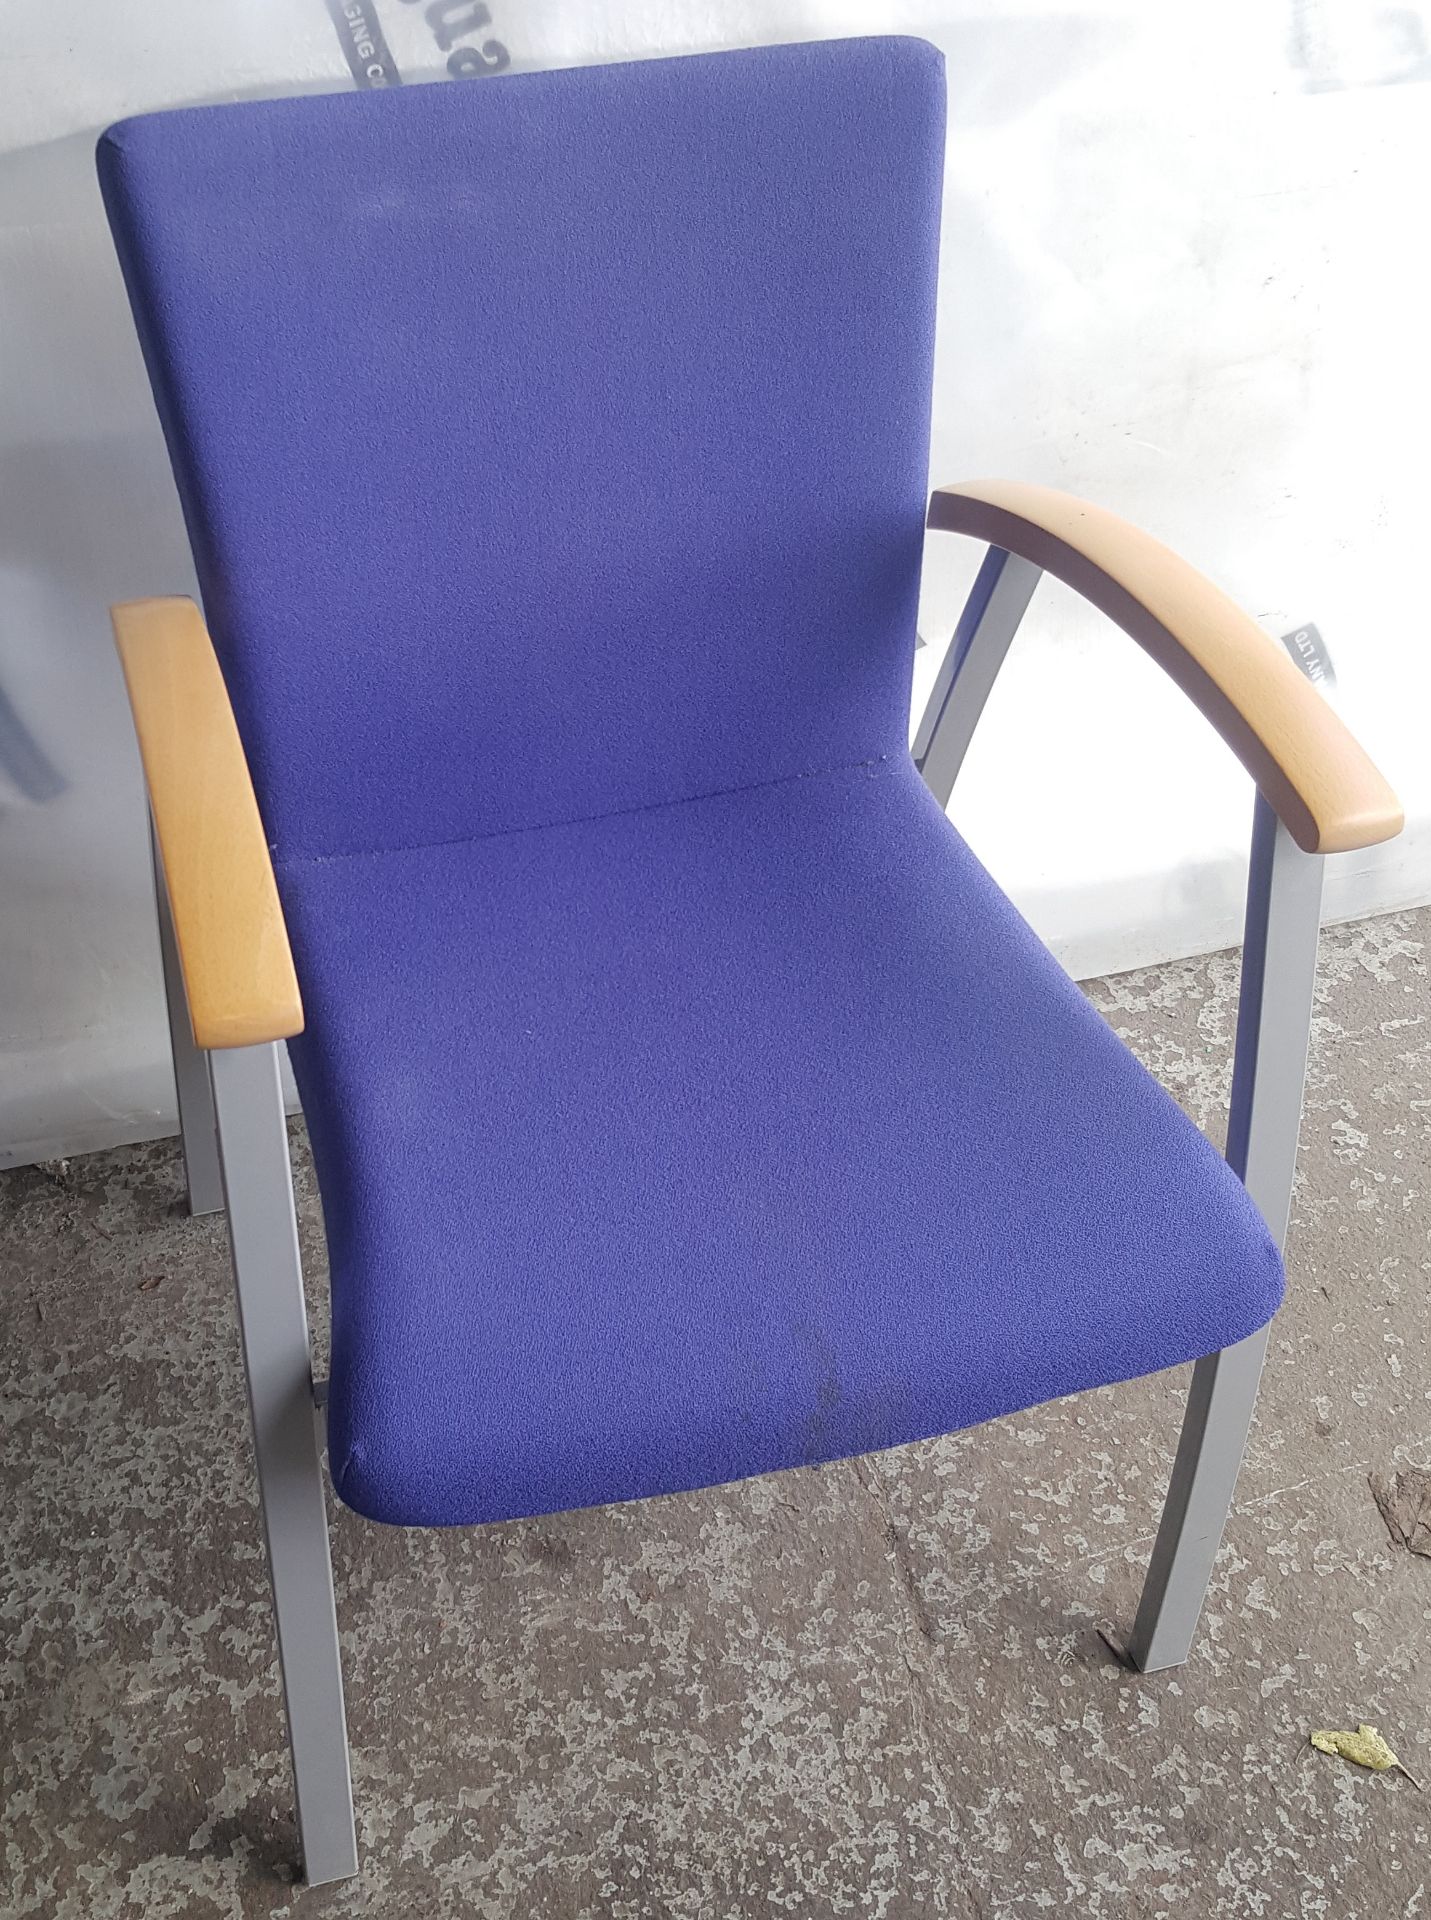 6 x Royal Blue Fabric Stackable Office Chairs - REF: TofT - CL011 - Location: Altrincham WA14